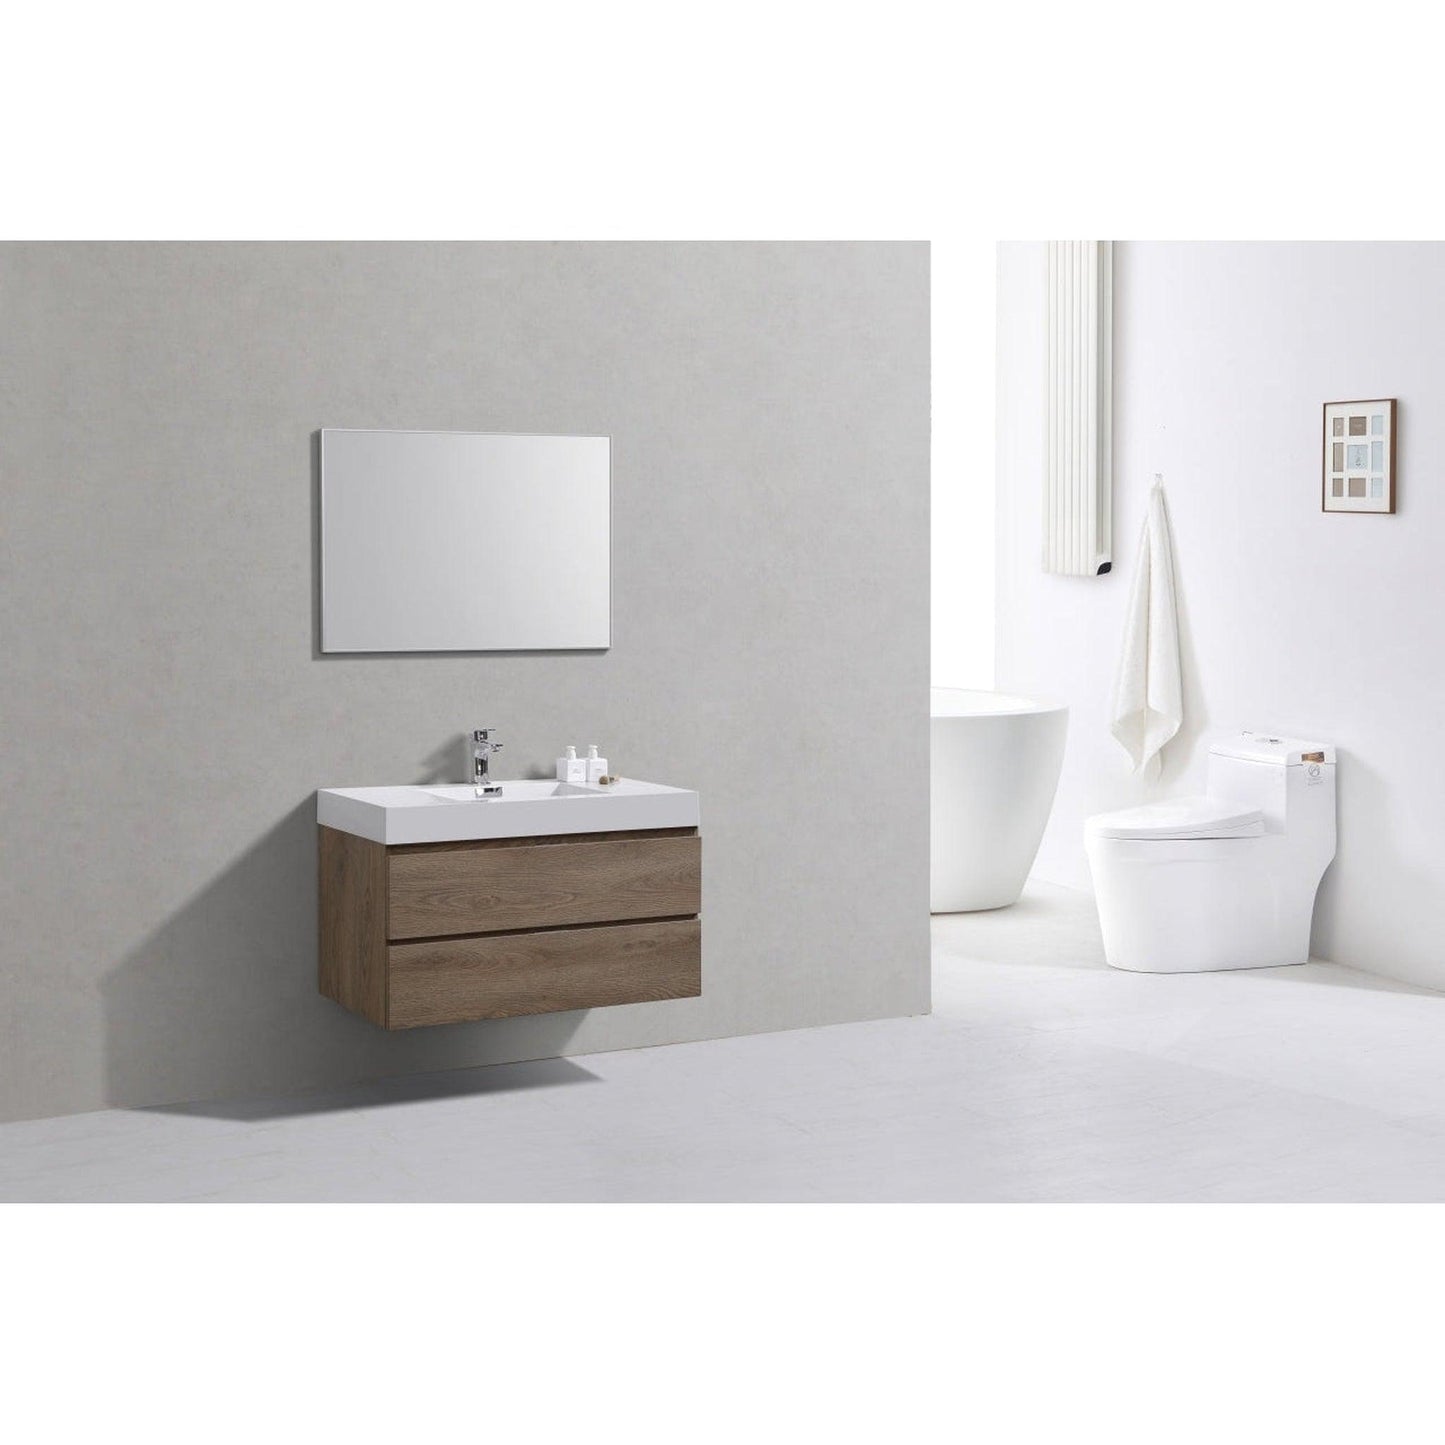 KubeBath Bliss 40" Butternut Wall-Mounted Modern Bathroom Vanity With Single Integrated Acrylic Sink With Overflow and 40" Butternut Framed Mirror With Shelf